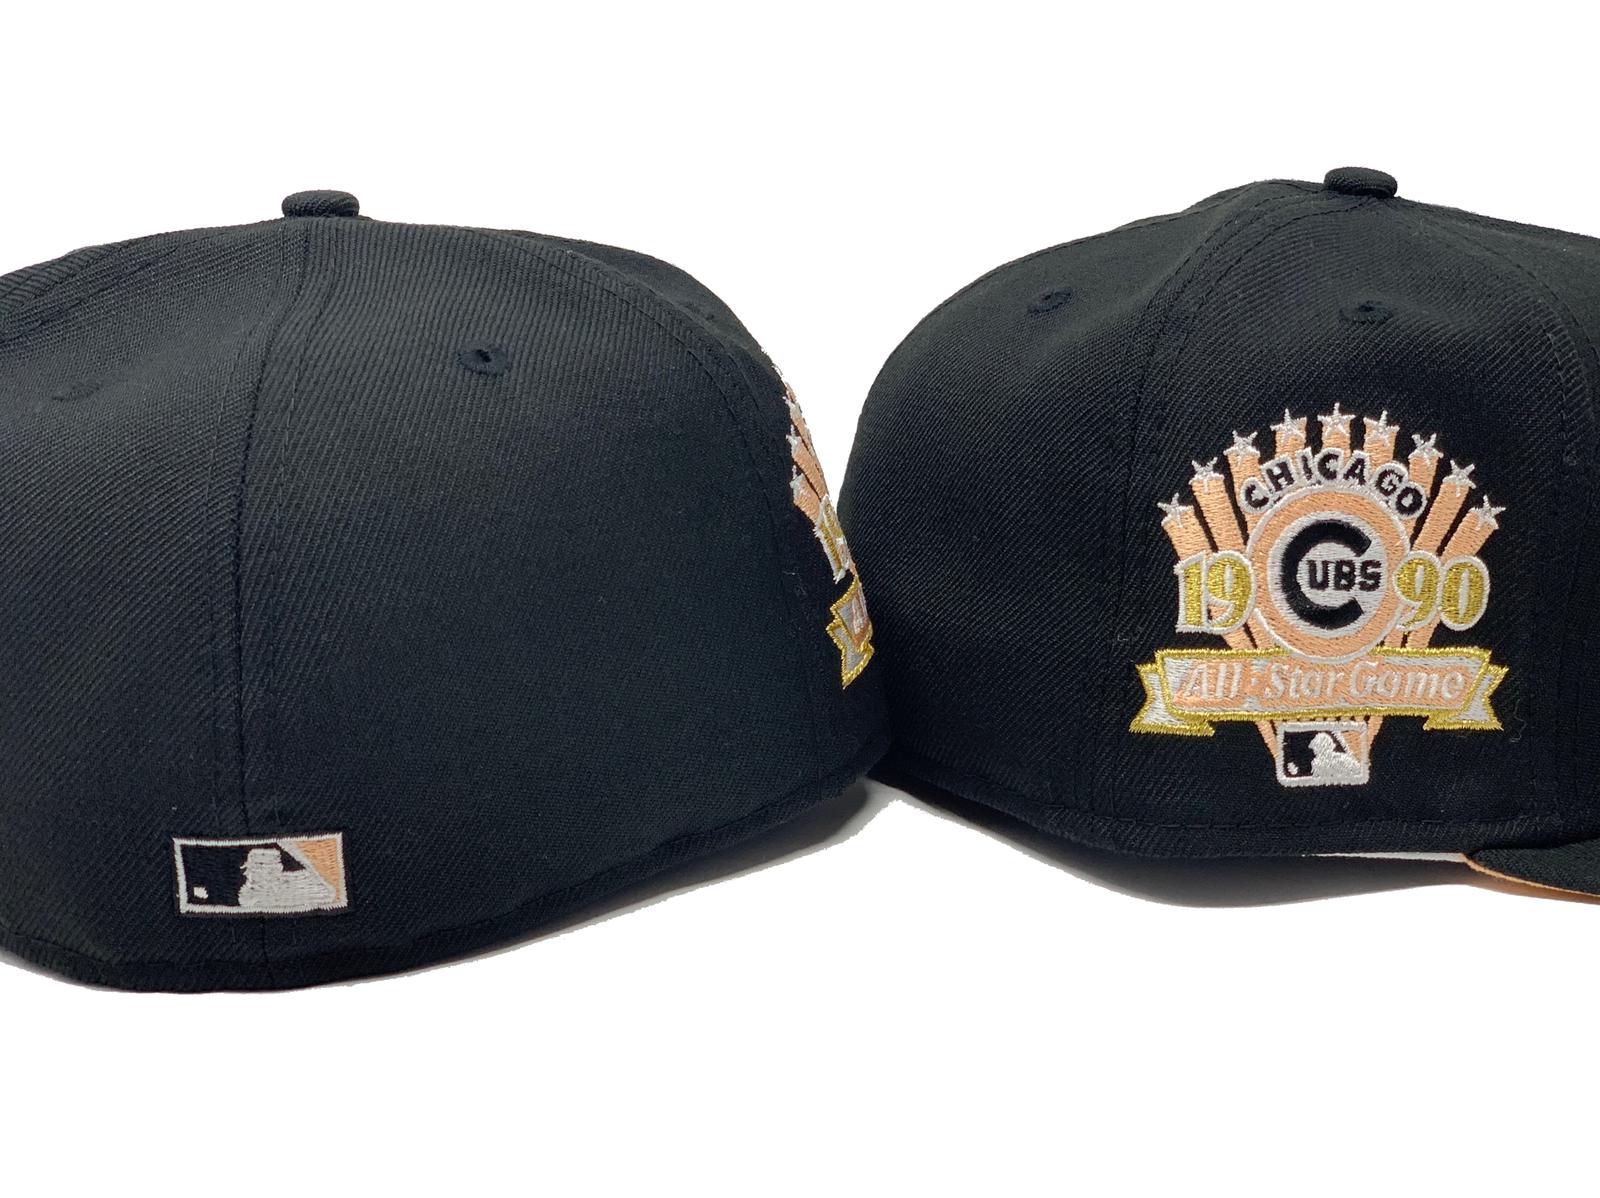 Chicago Cubs Black & Peach Bullseye 59FIFTY Fitted Cap